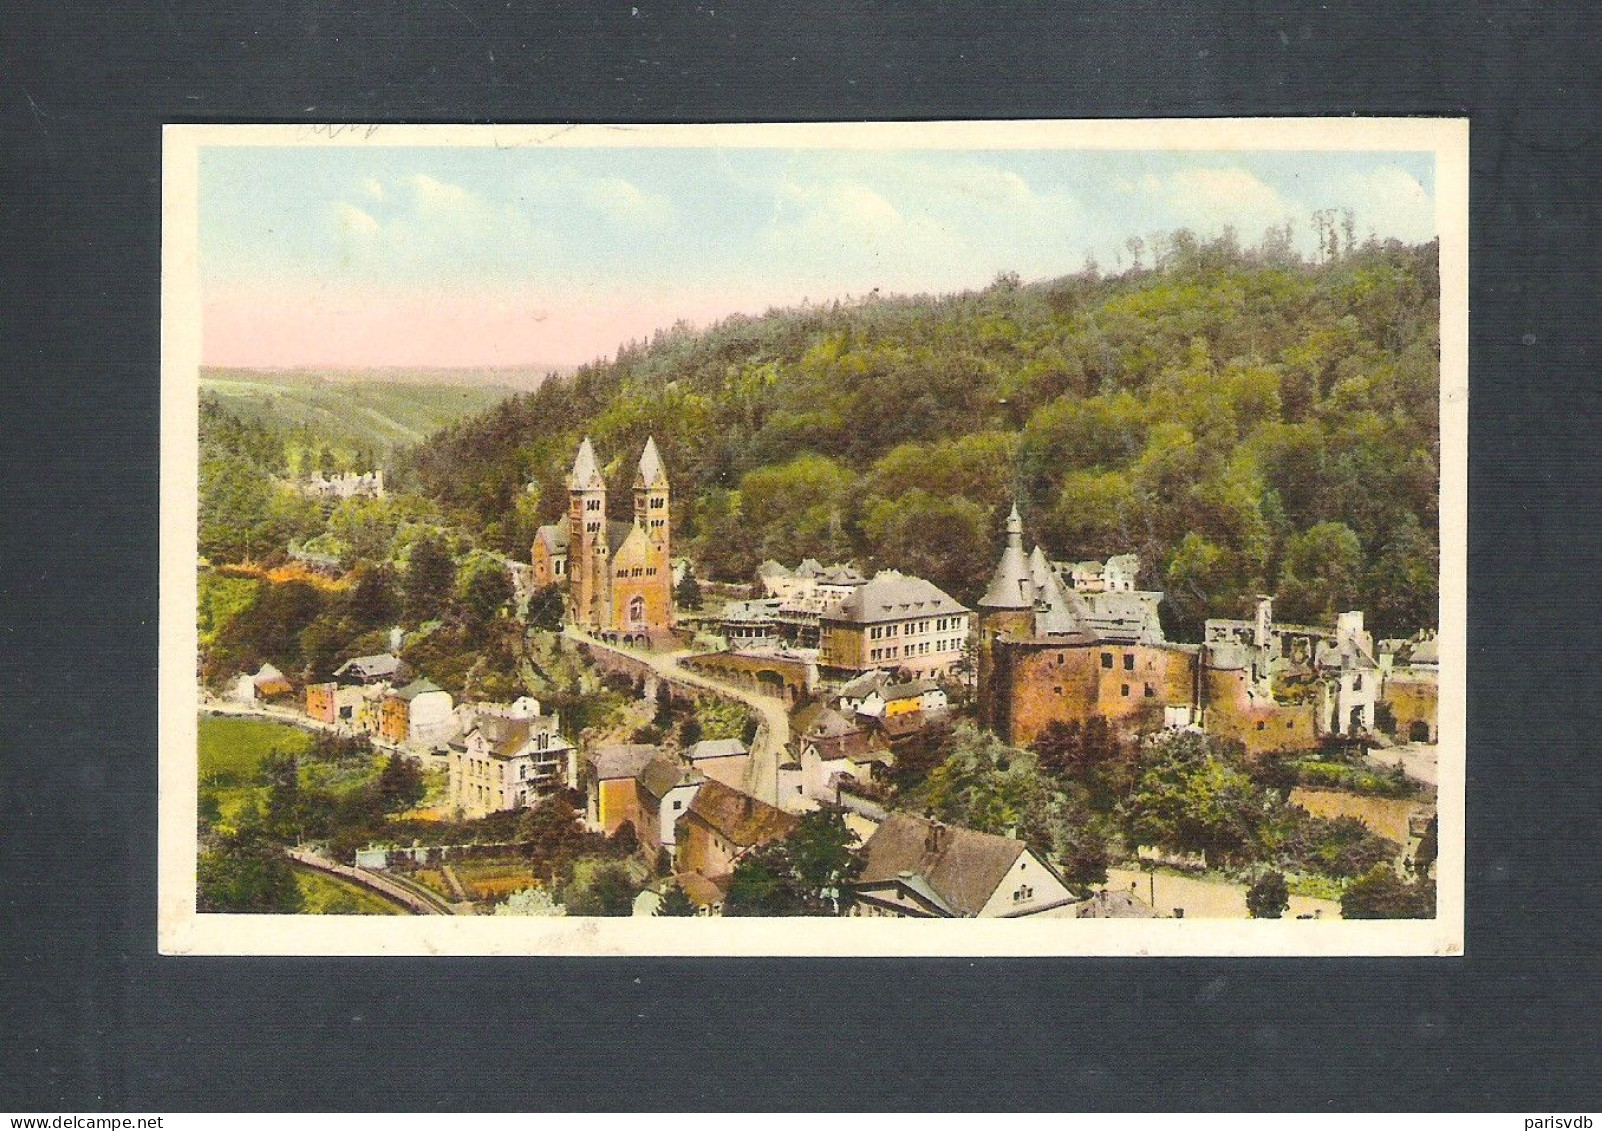 LUXEMBOURG -   CLERVAUX - PANORAMA   (L 209) - Clervaux